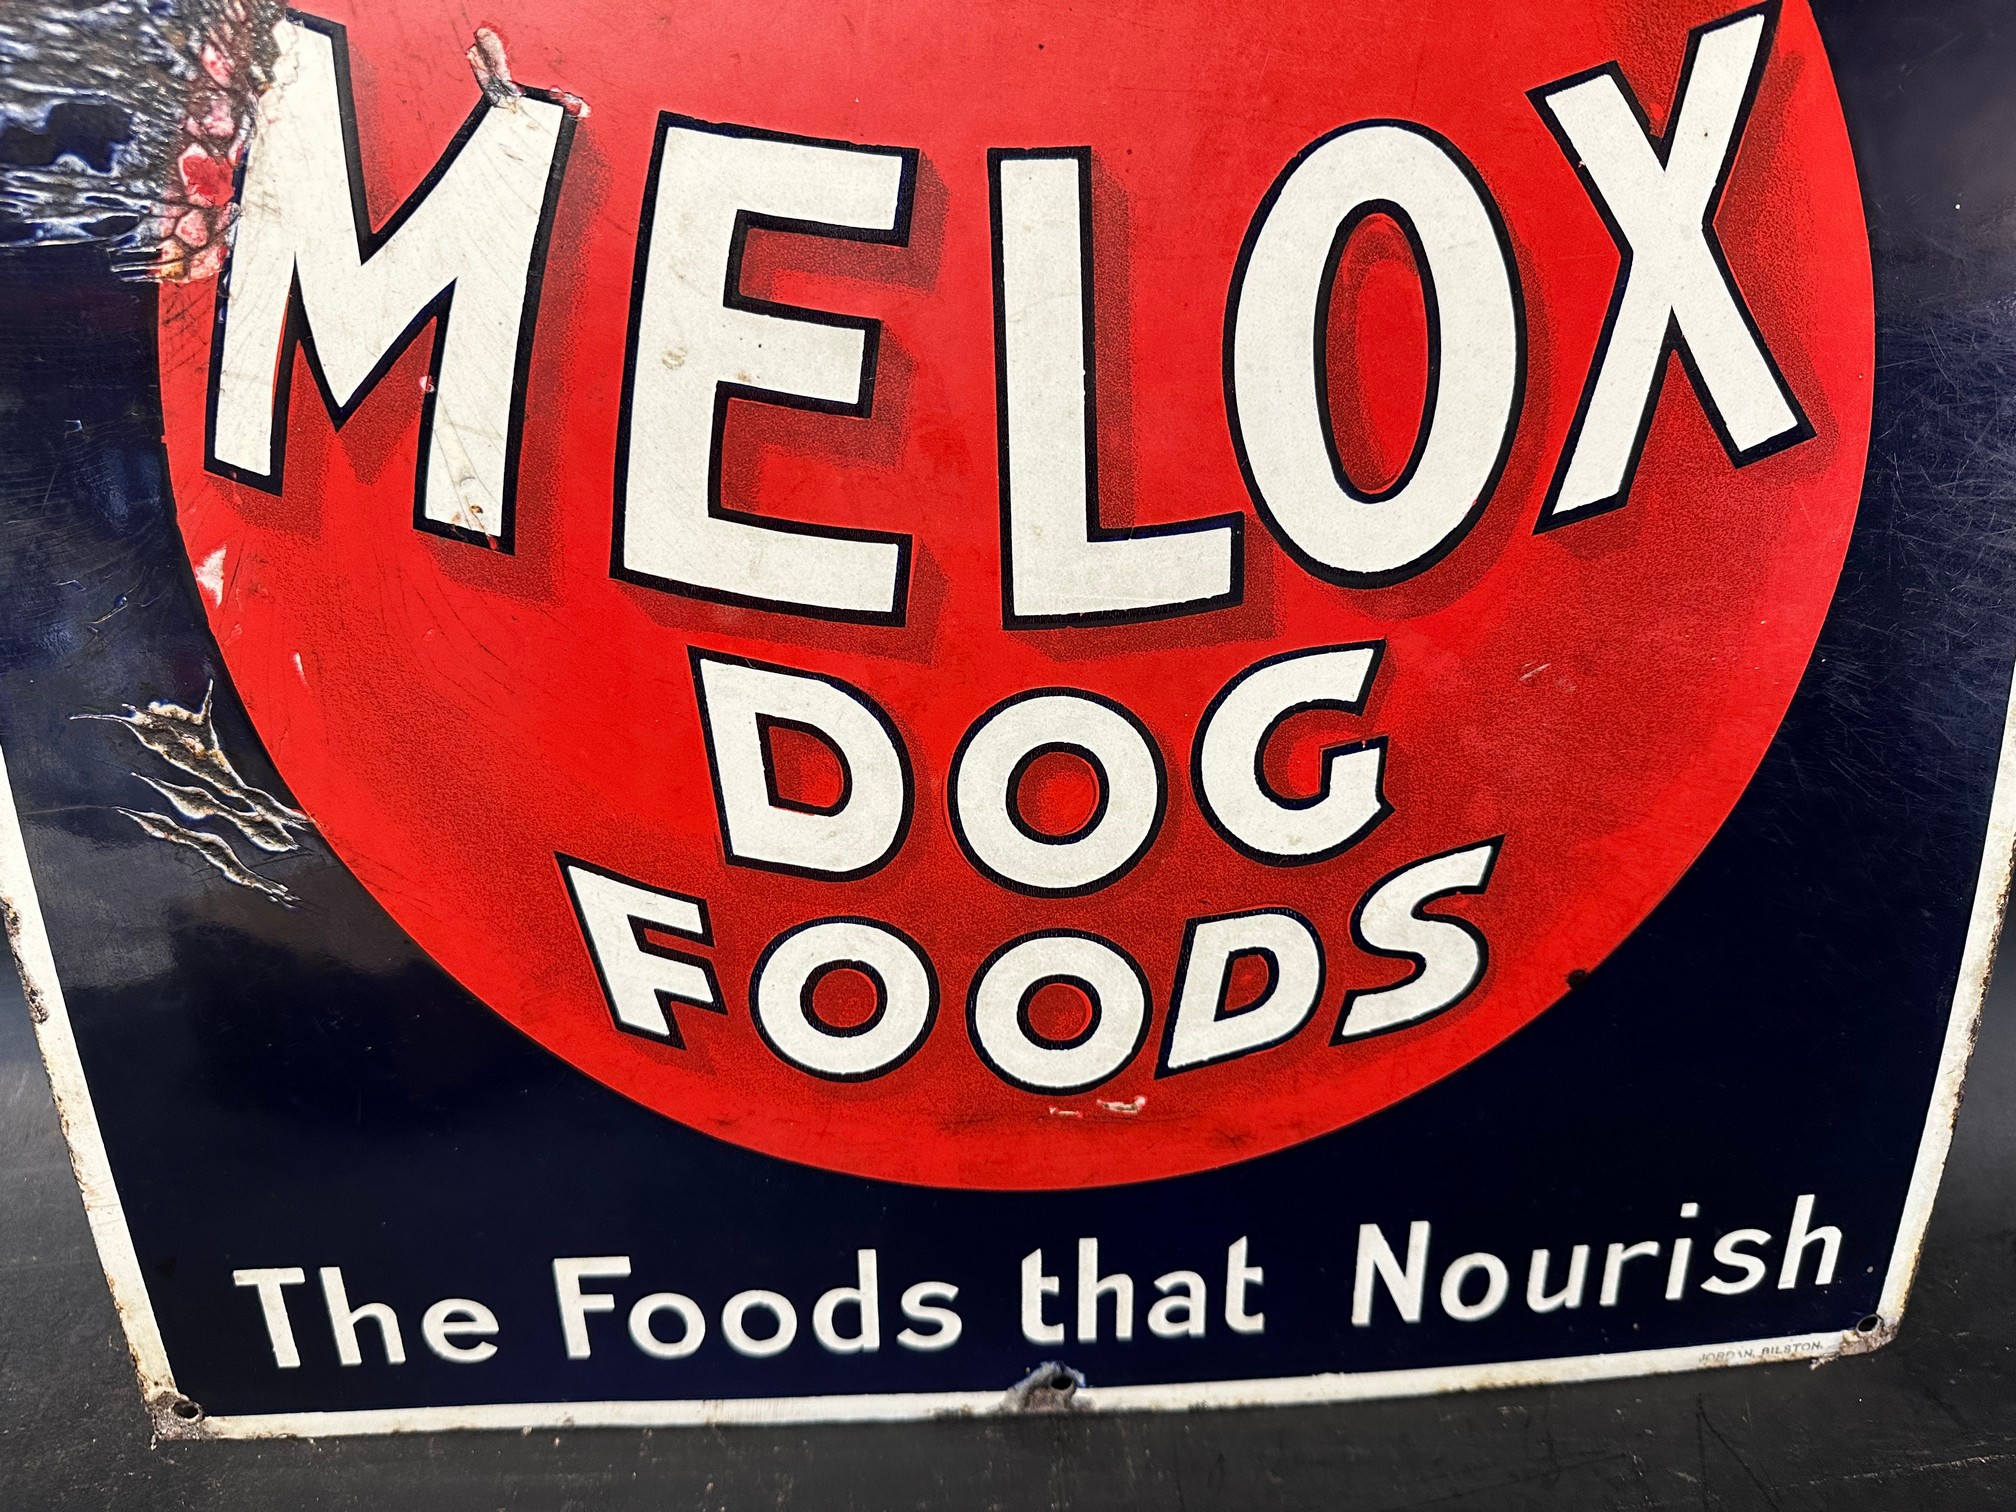 A Melox Dog Foods 'The Foods that Nourish' pictorial enamel advertising sign, 18 x 26". - Image 6 of 6